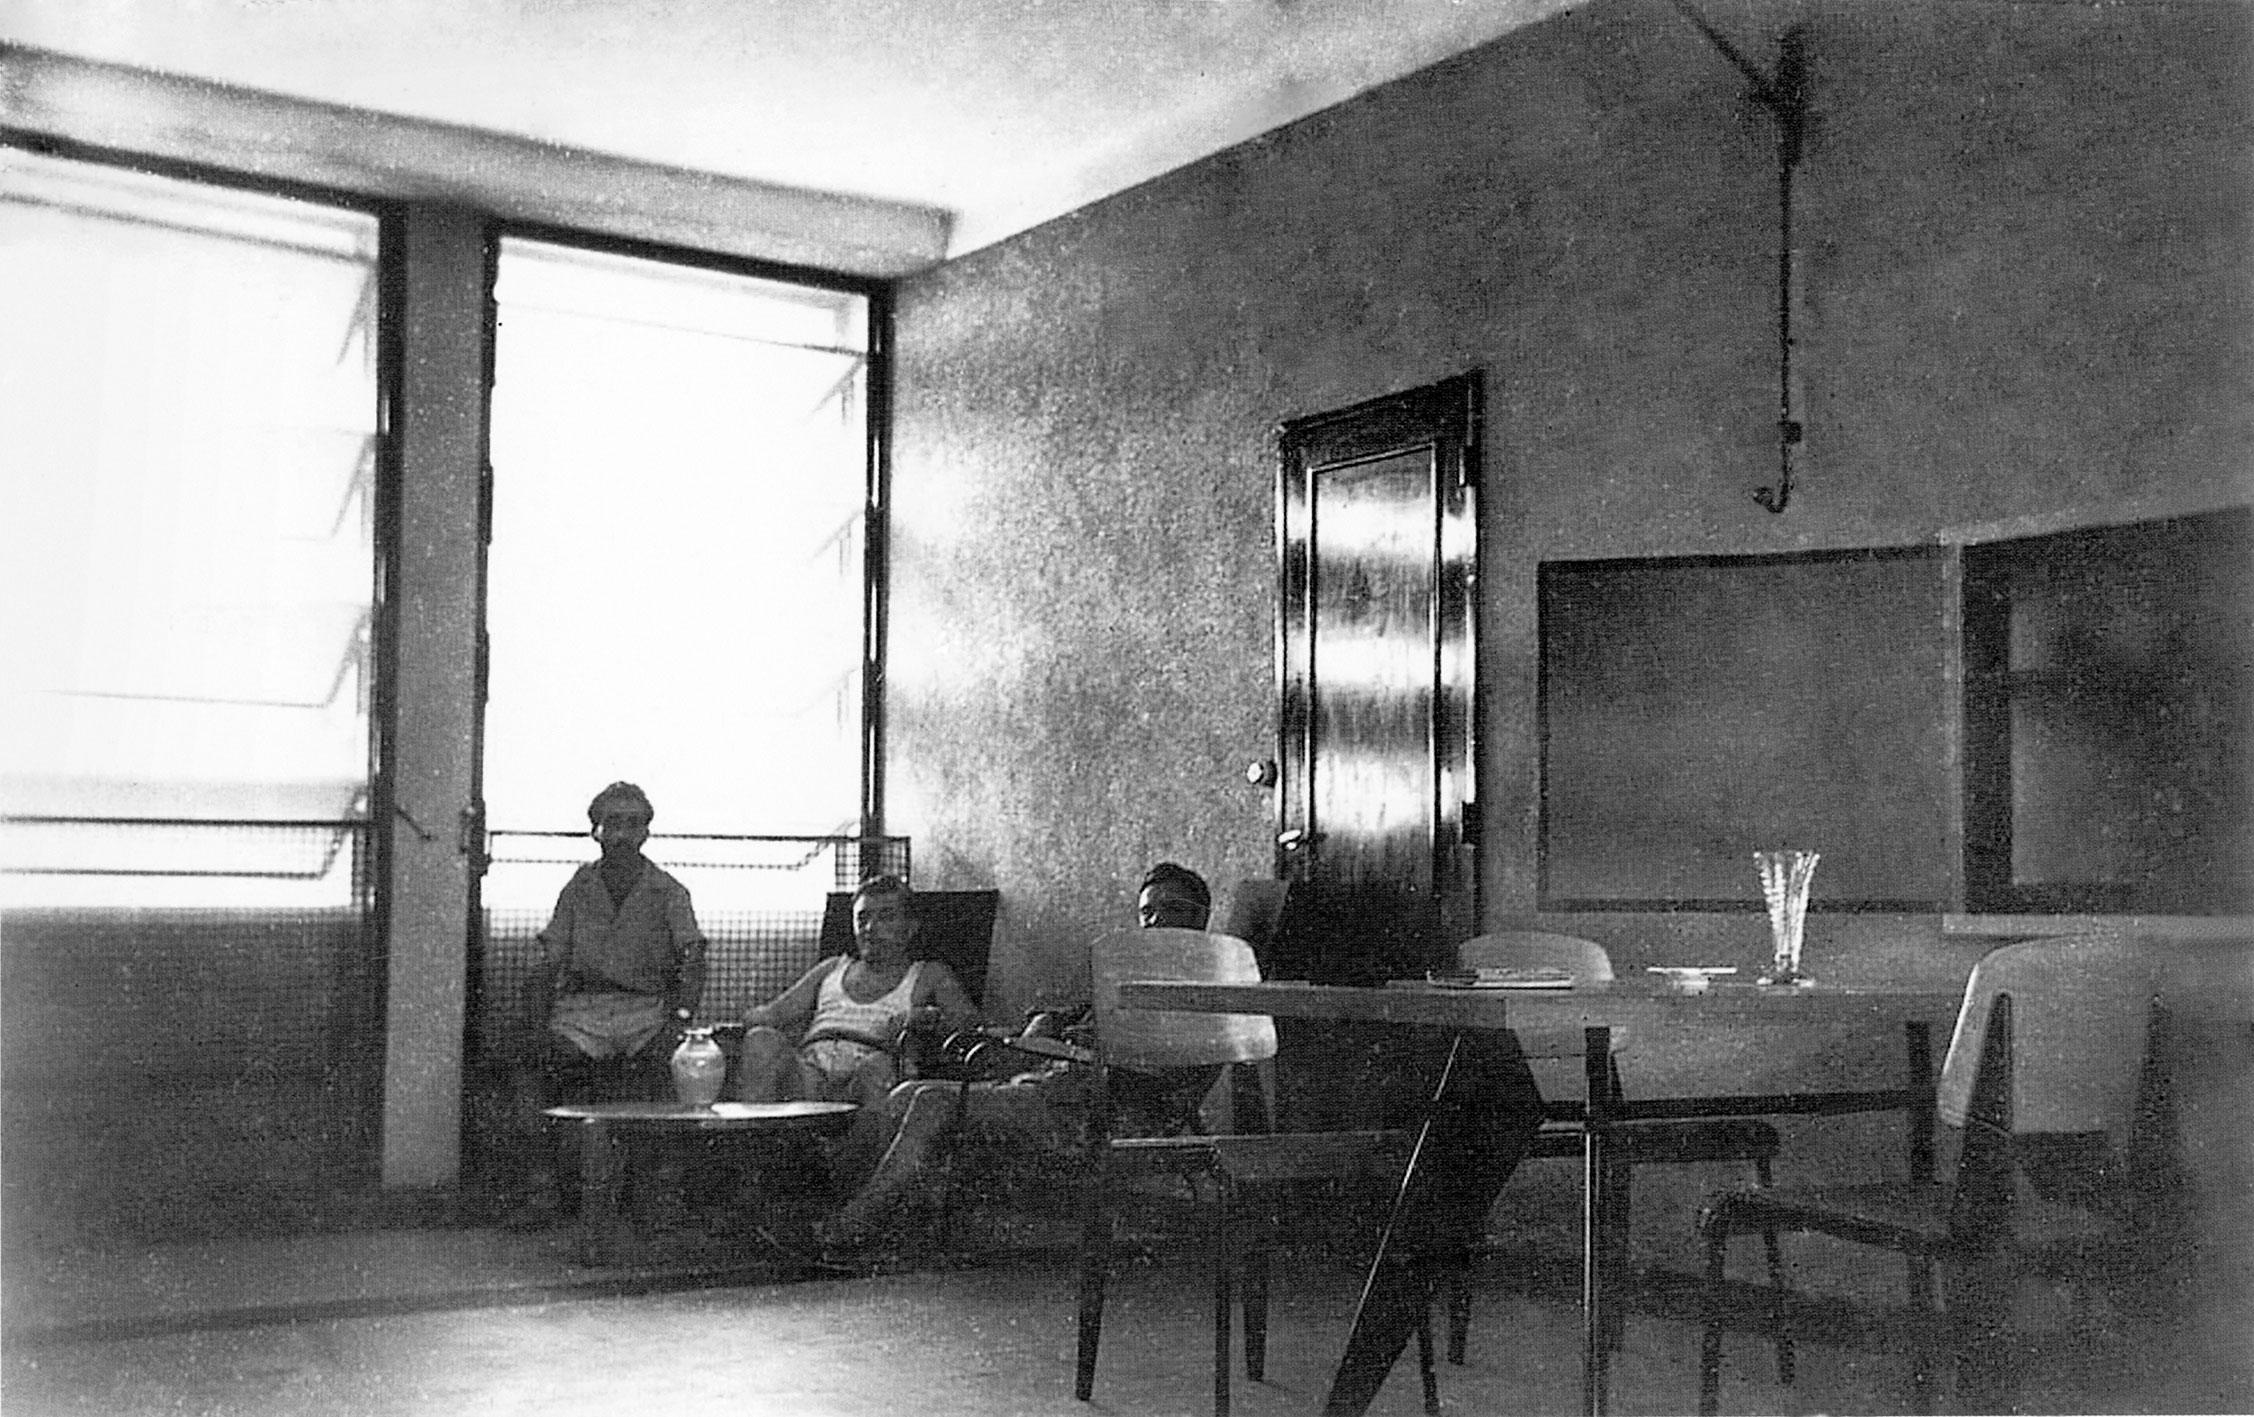 Air France building, Brazzaville (architects Hébrard, Lefebvre, Letu and Bienvenu, Ch. Perriand, interior fitting, 1952). Detail of an apartment equipped with a S.A.M. no. 506 table, Tropique no. 300 chairs, and a special oblique-arm swing-jib lamp. View ca. 1952.